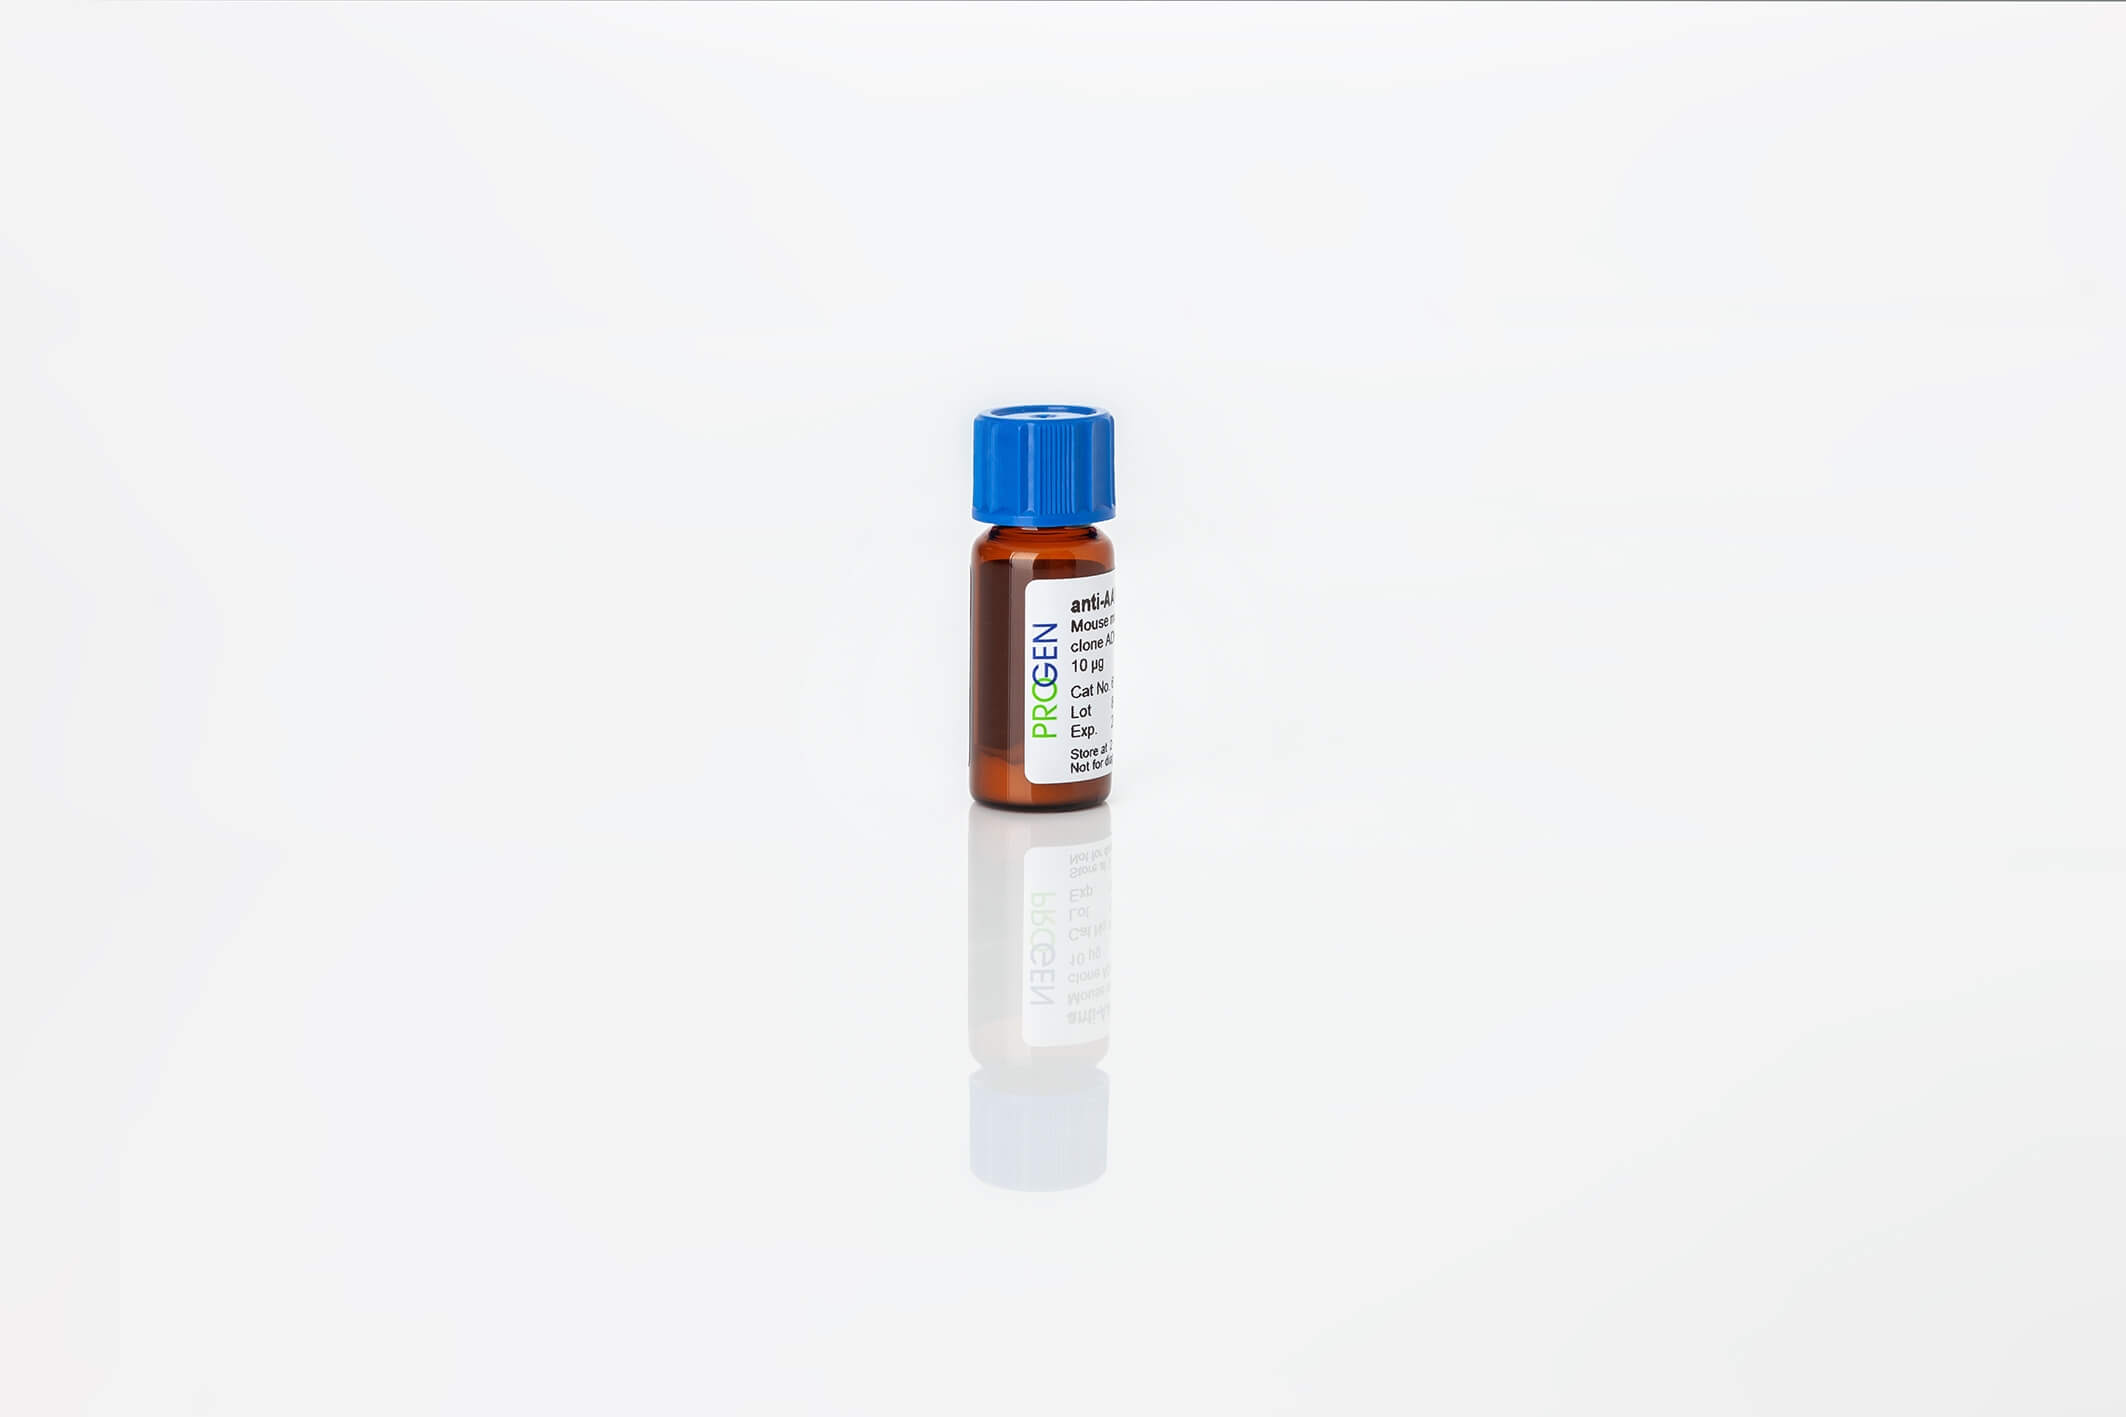 anti-Helicobacter pylori mouse monoclonal, EBS-I-041, purified